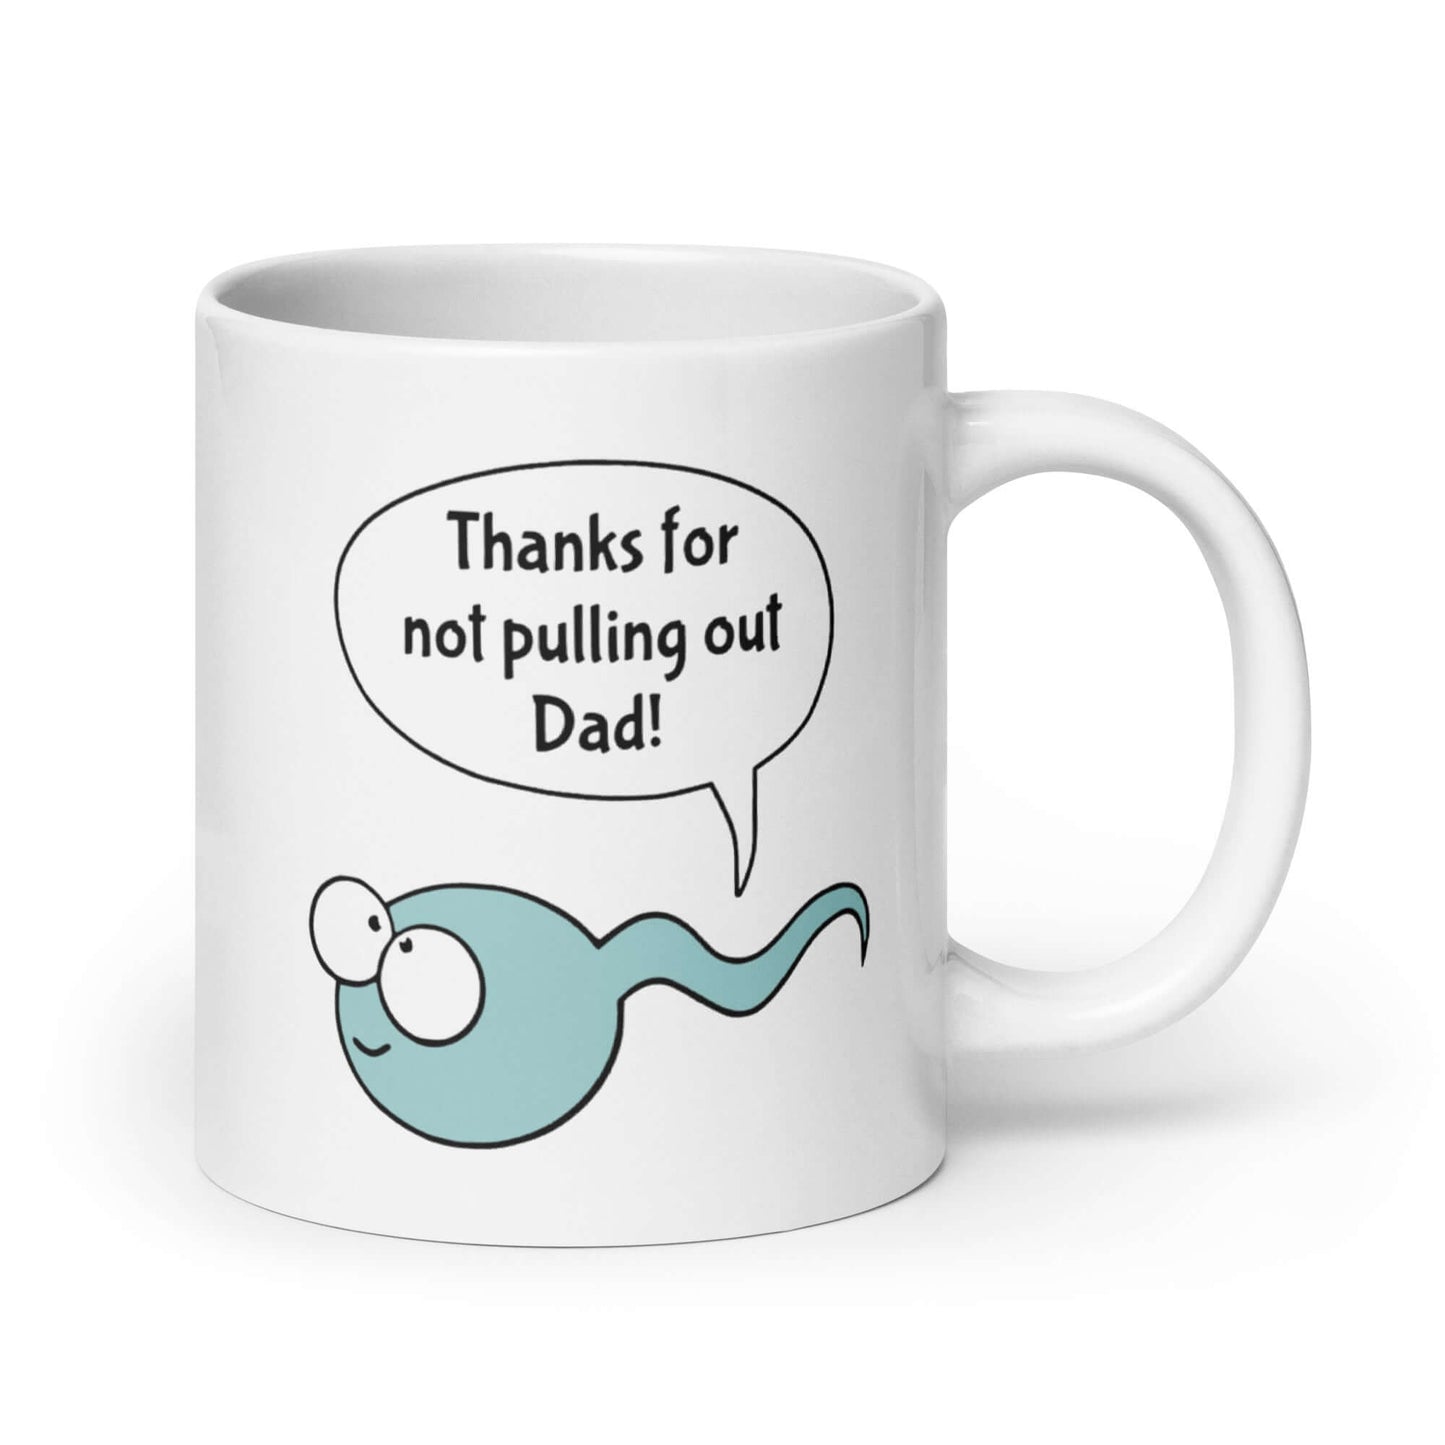 Thanks for not pulling out Dad mug for dad